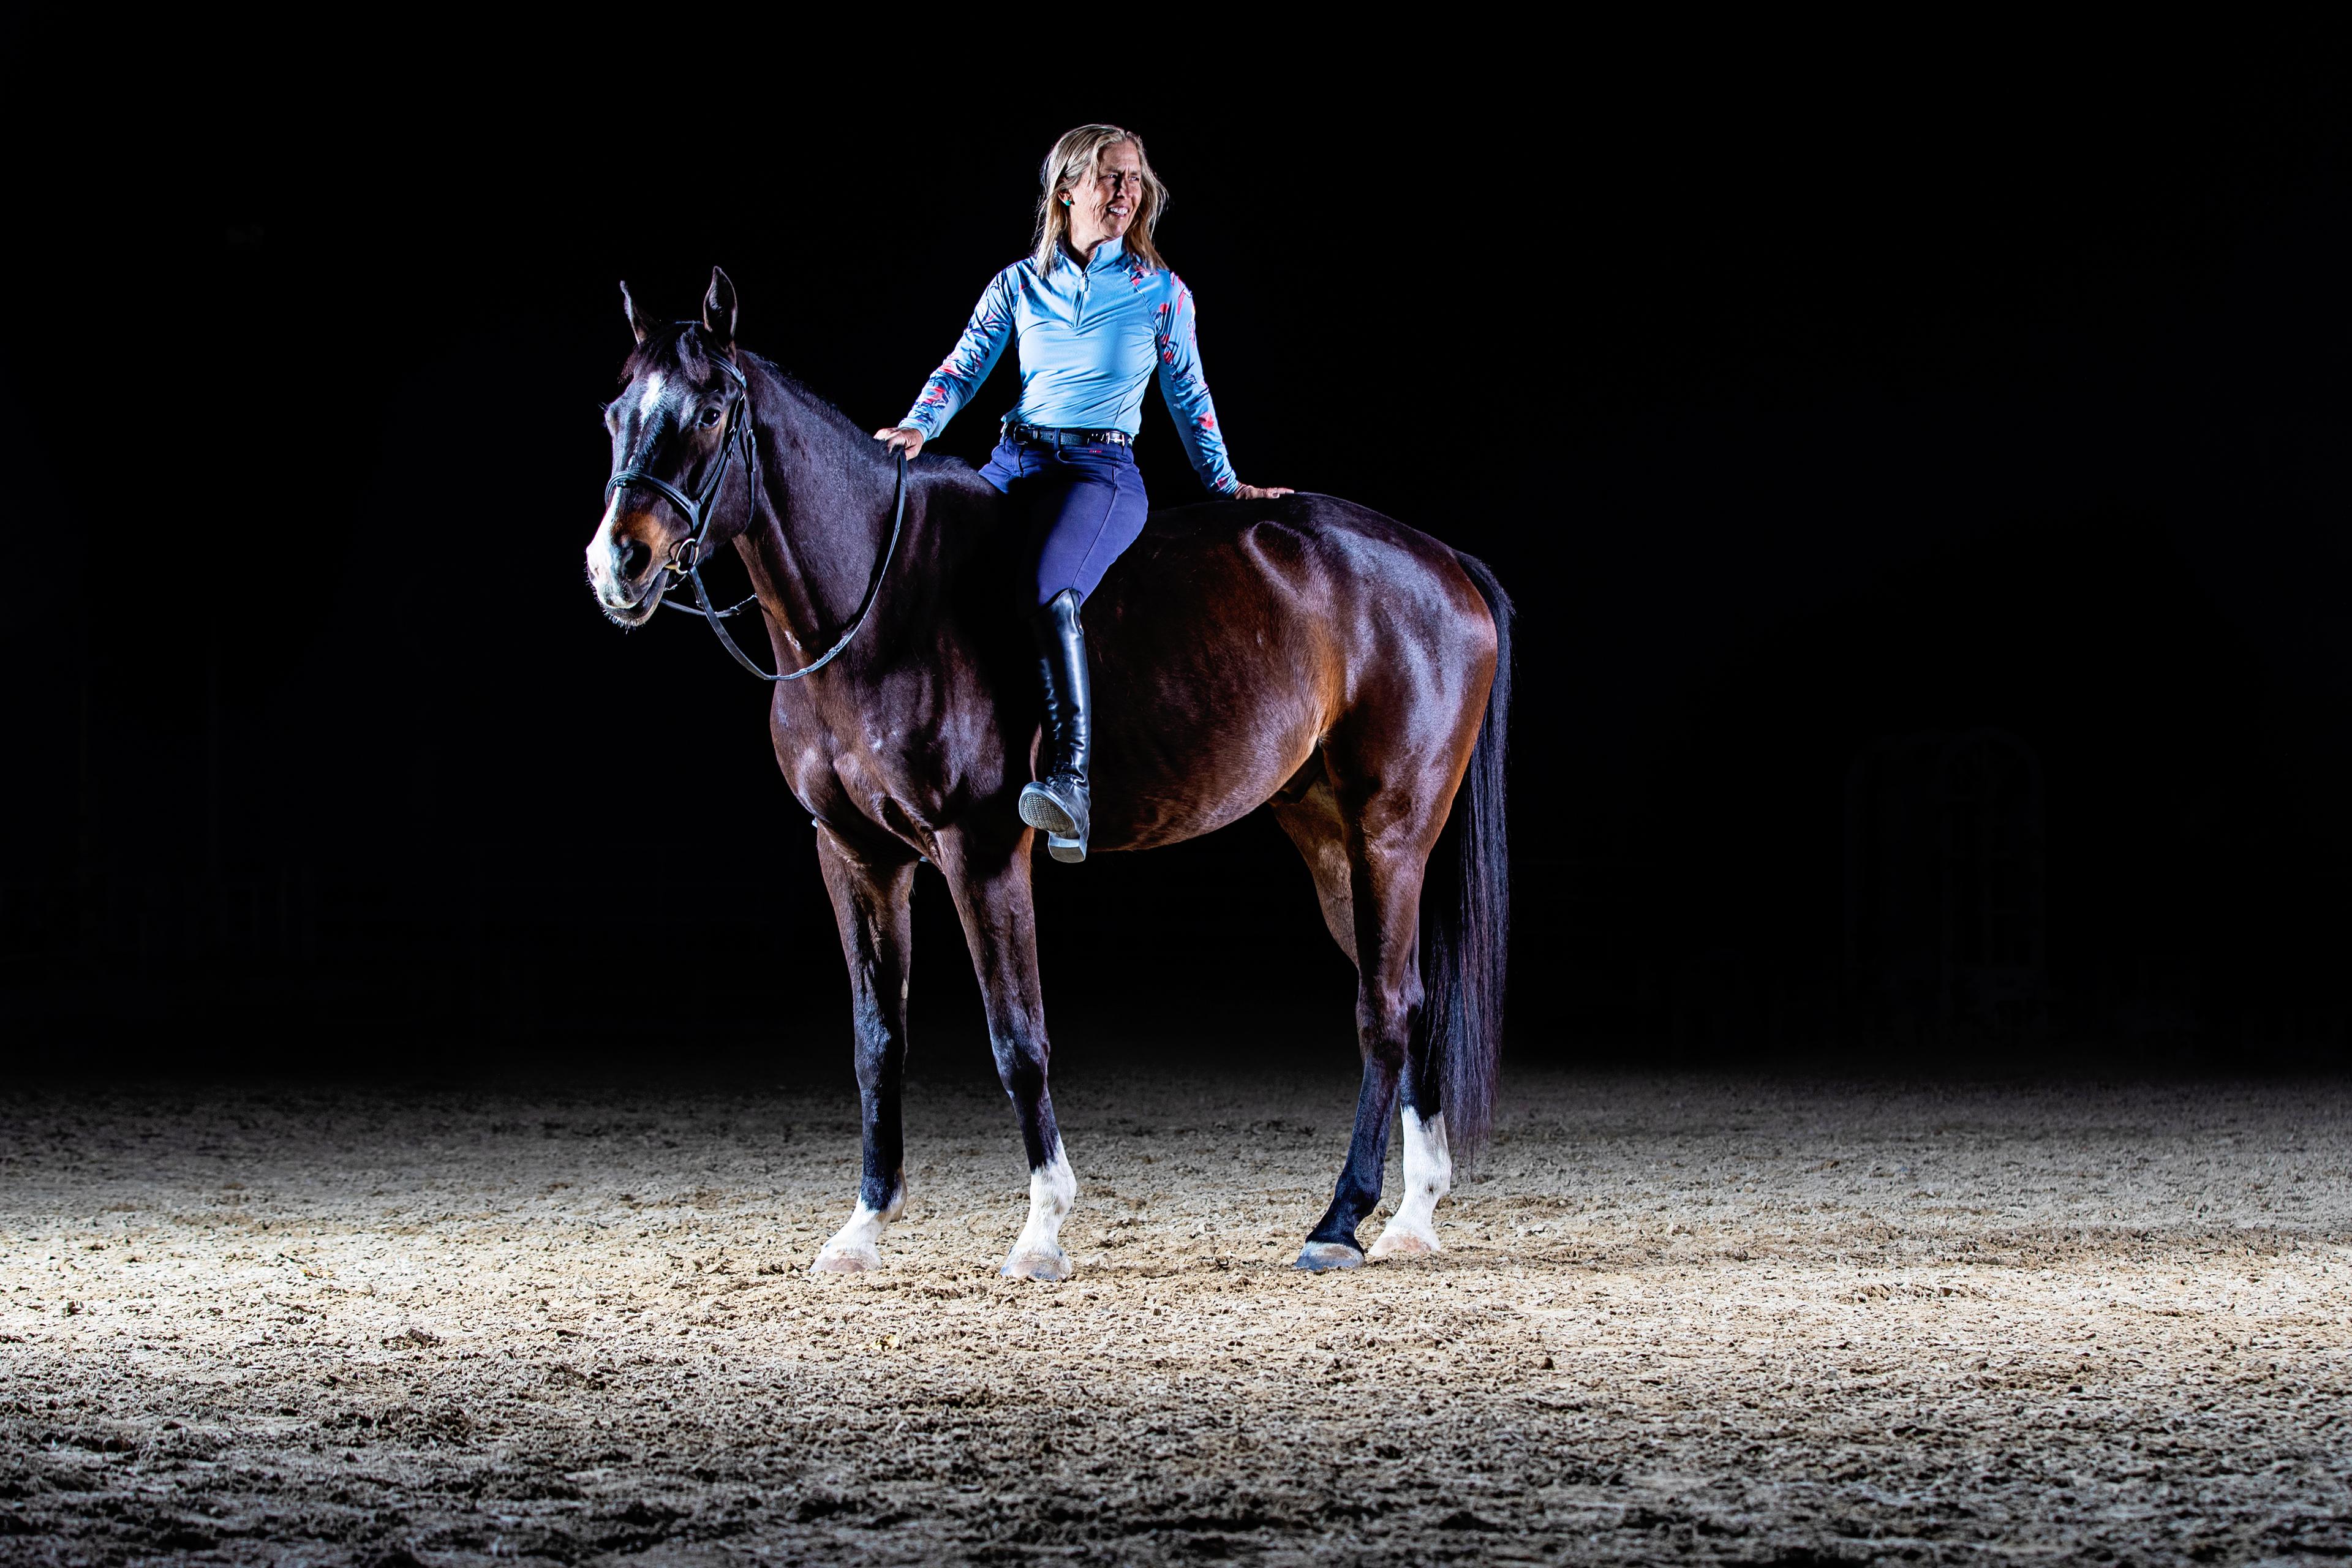 bay horse with rider at nite in spotlight